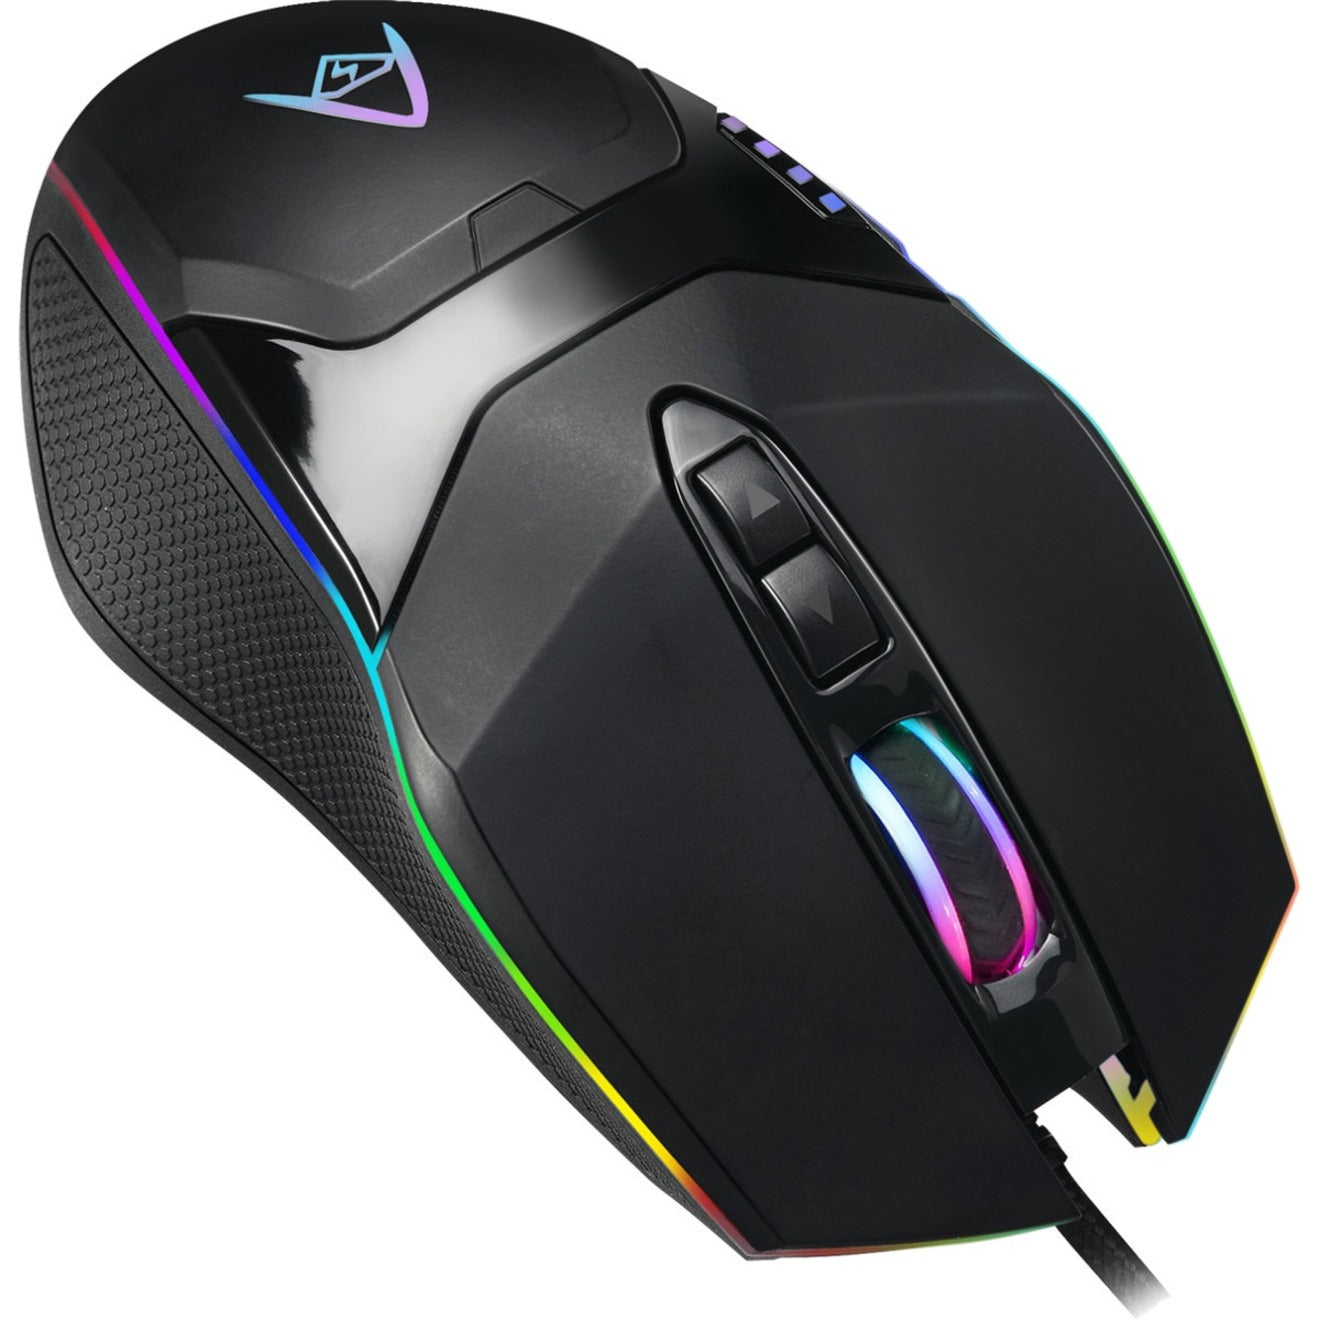 Adesso IMOUSE X5 RGB Illuminated Gaming Mouse, 6400 DPI, Ergonomic Fit, 7 Buttons